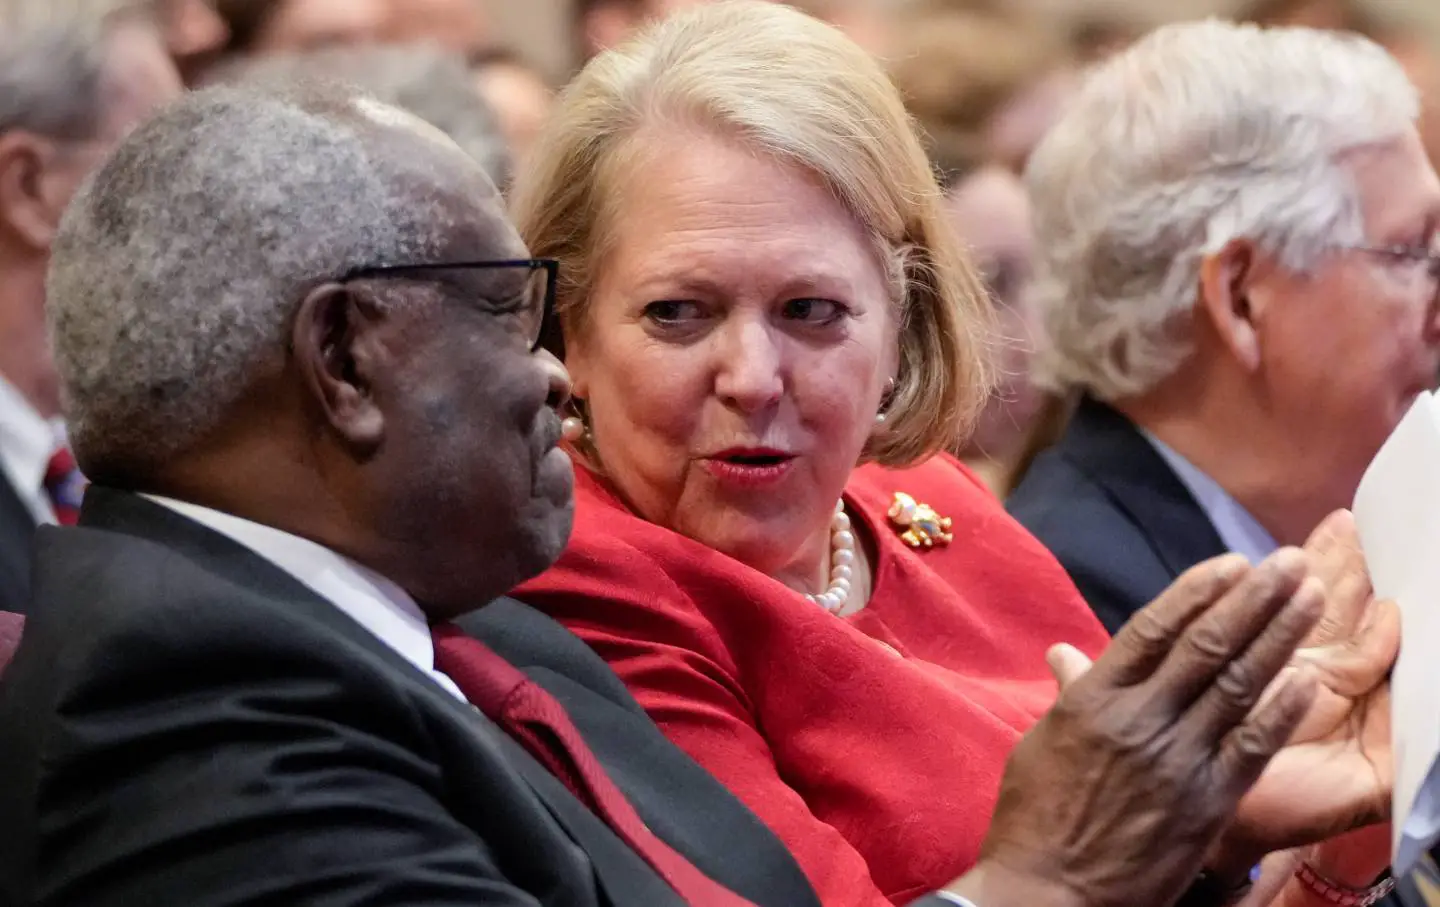 Clarence and Ginni Thomas, the Supreme Court’s Unethical “It” Couple